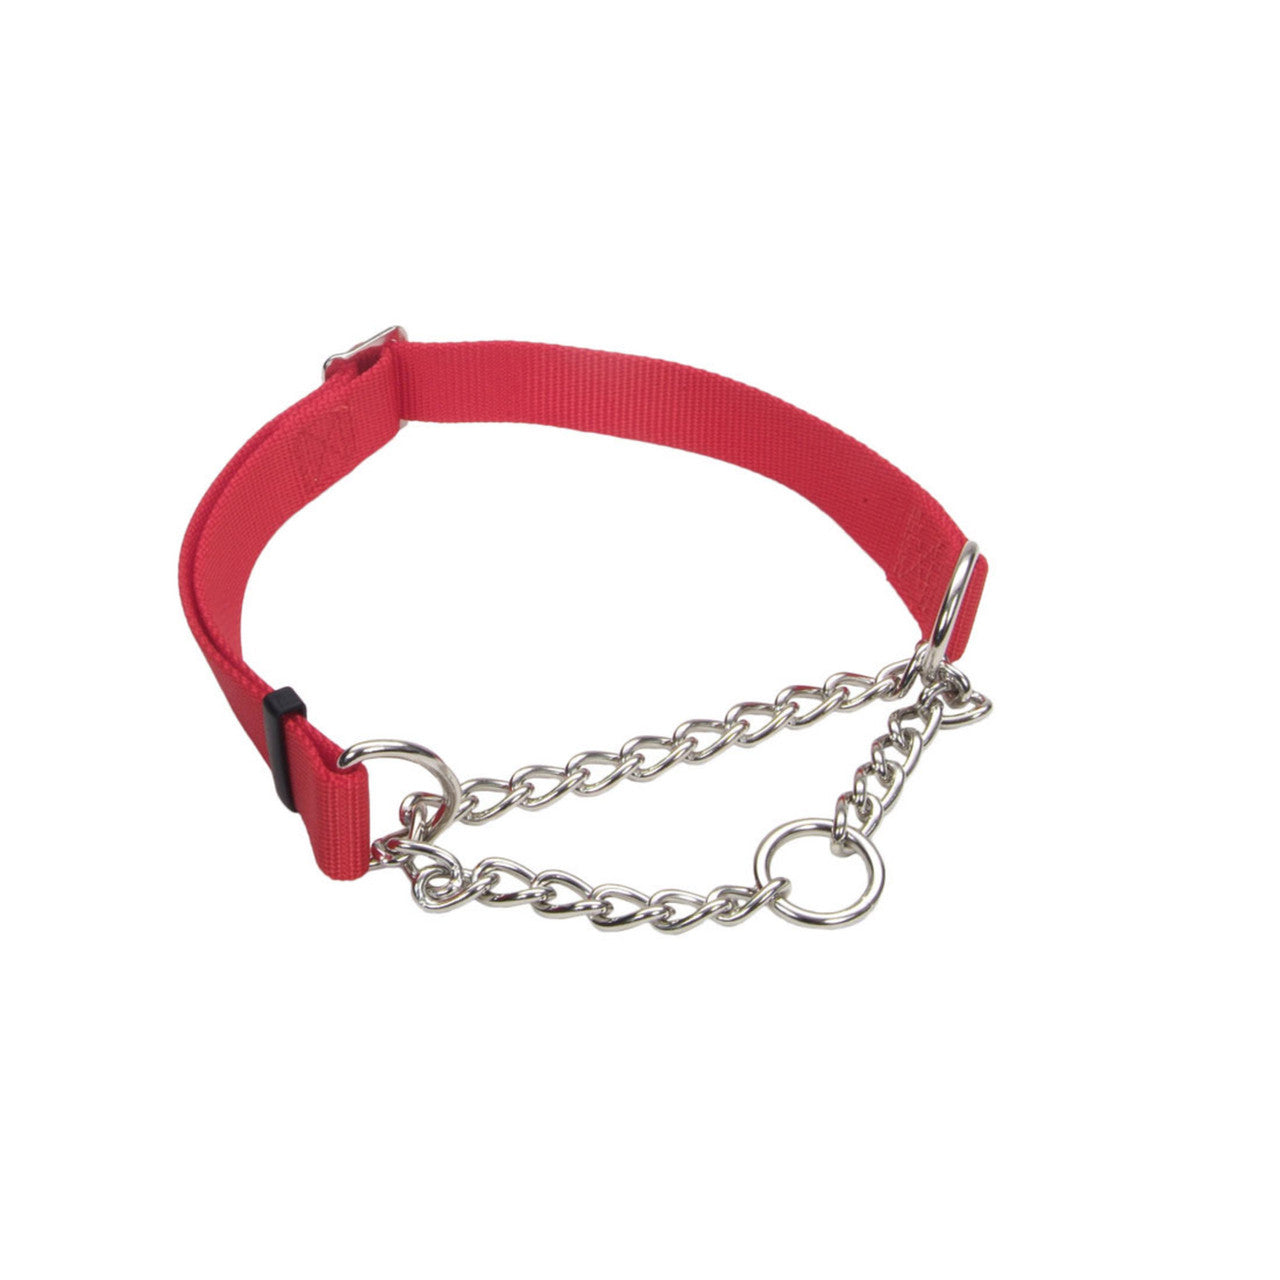 Check-Choke Adjustable Check Training Dog Collar Red 5/8 in x 10-14 in